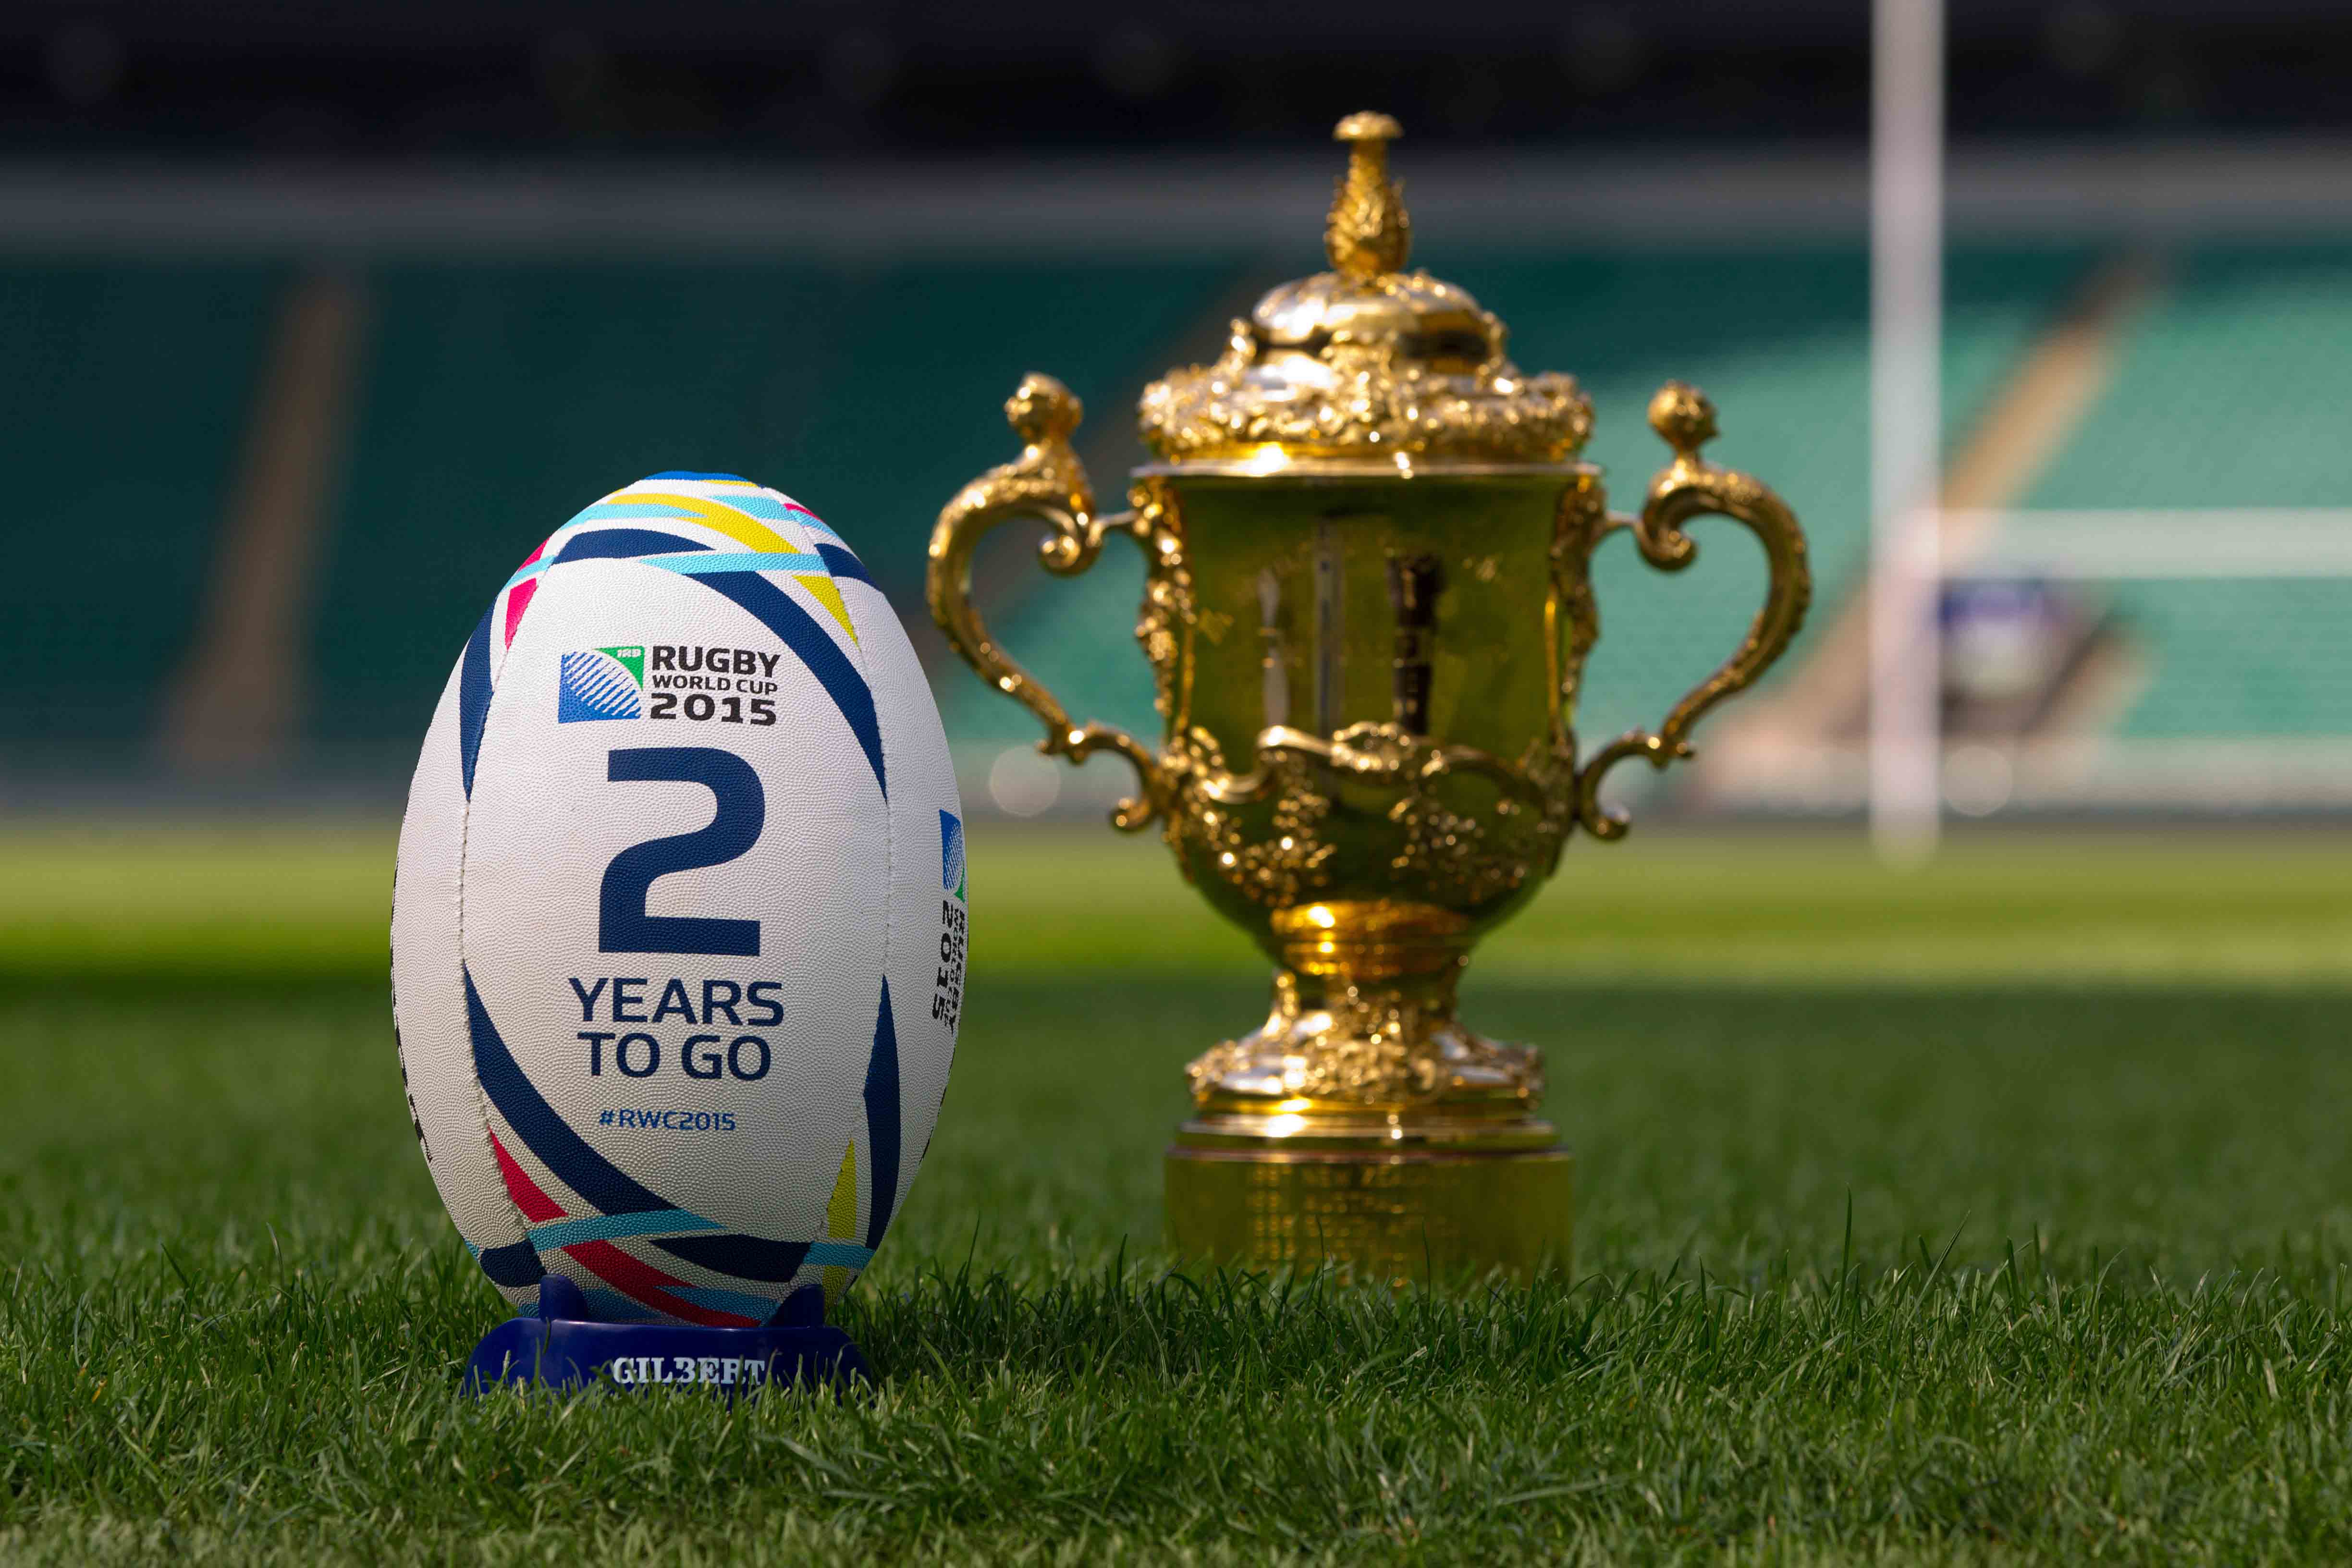 Rugby World Cup 2015 Wallpaper 16 X 3264